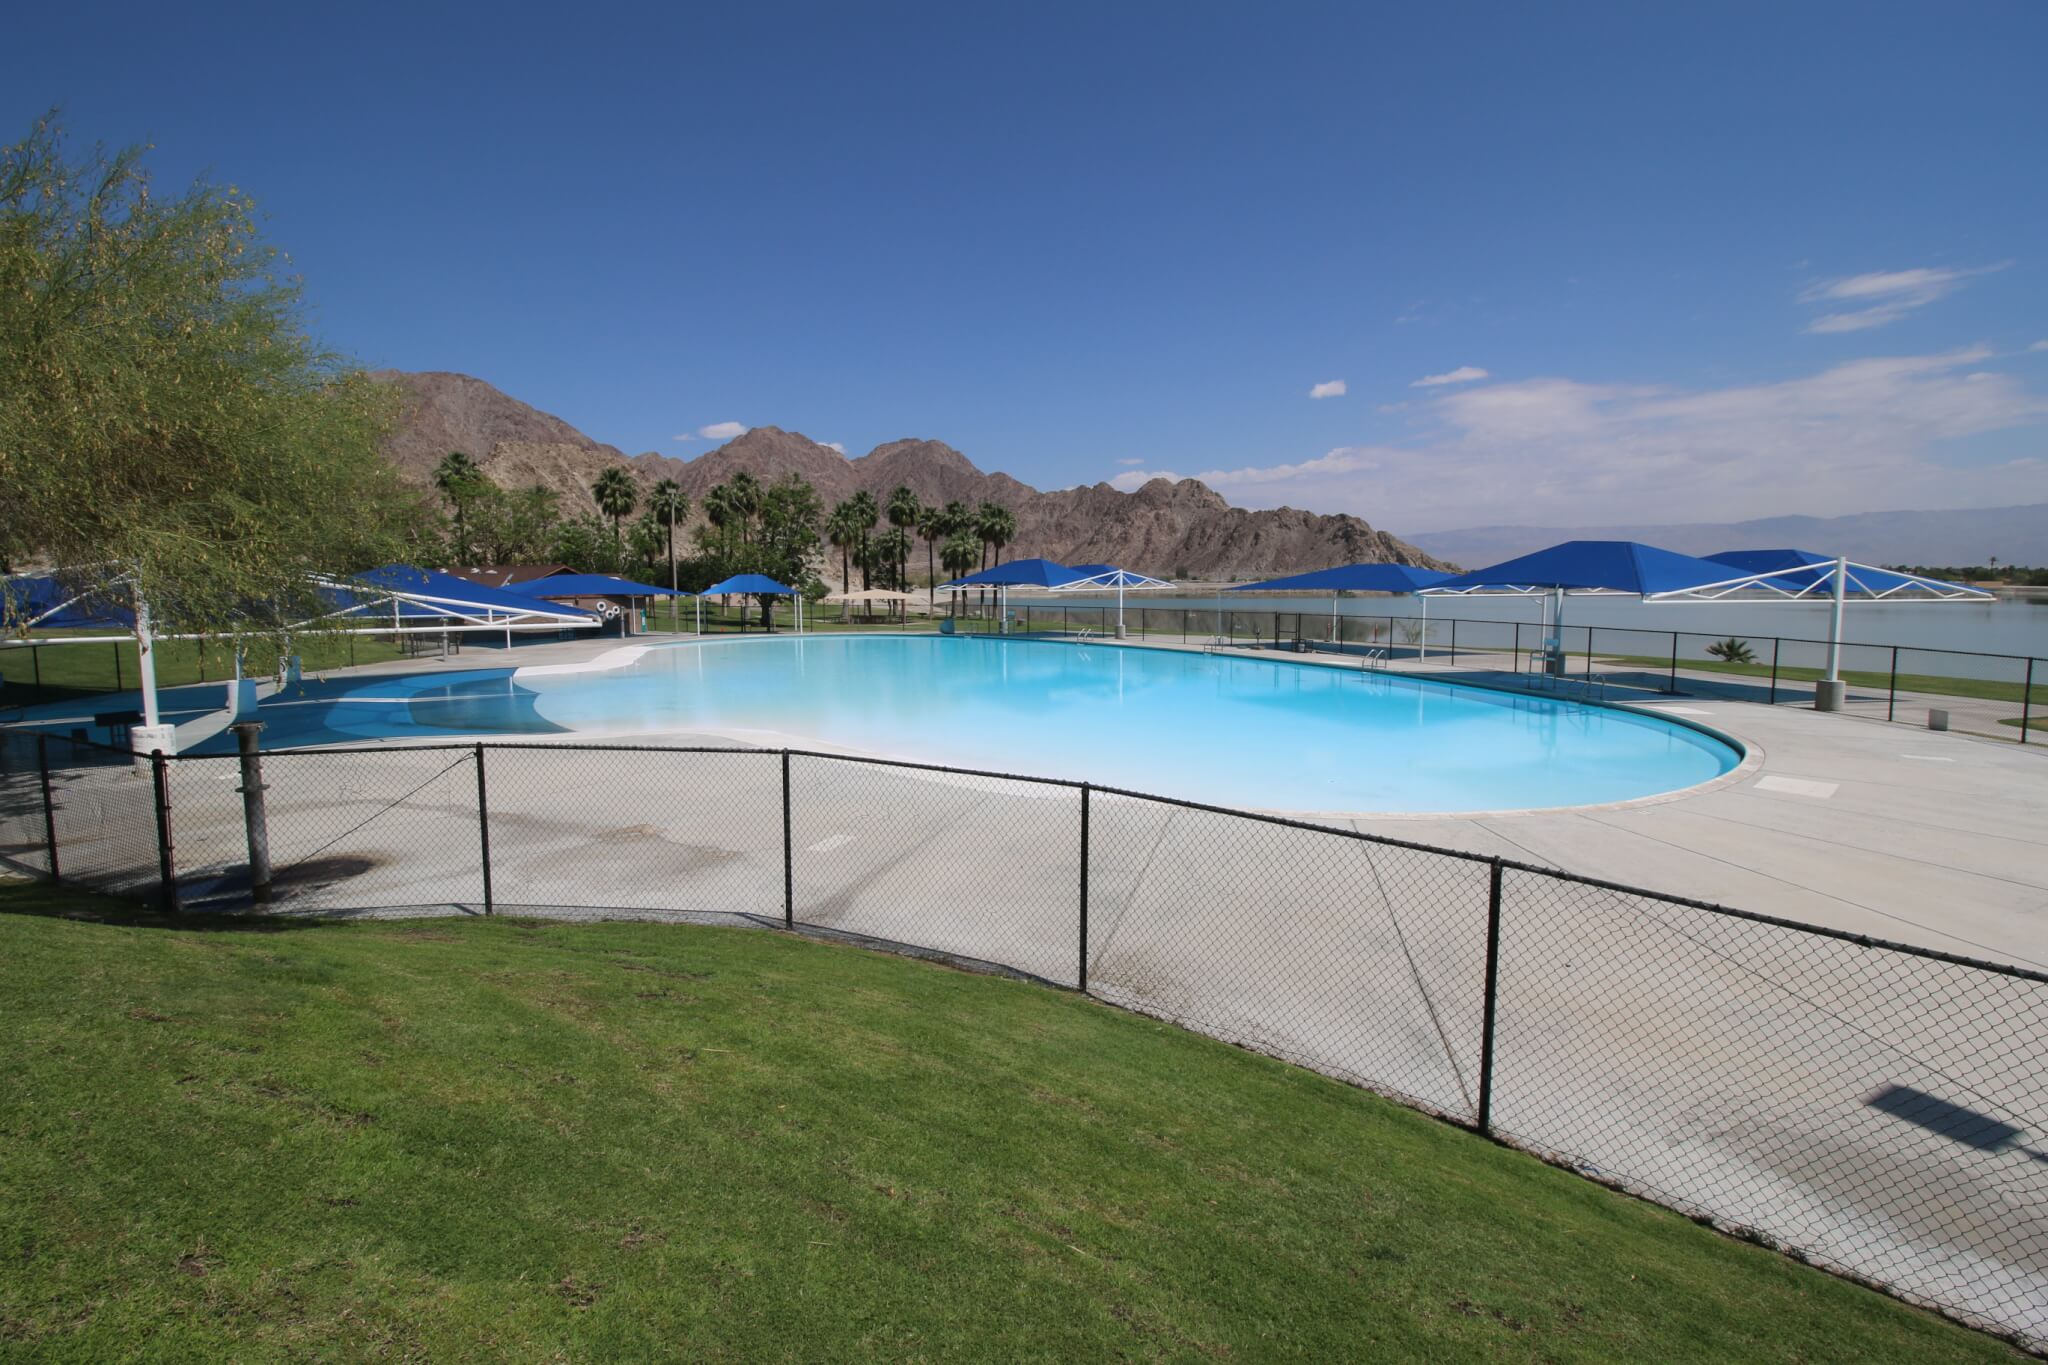 Riverside County Parks Campgrounds_Lake Cahuilla Swimming Pool